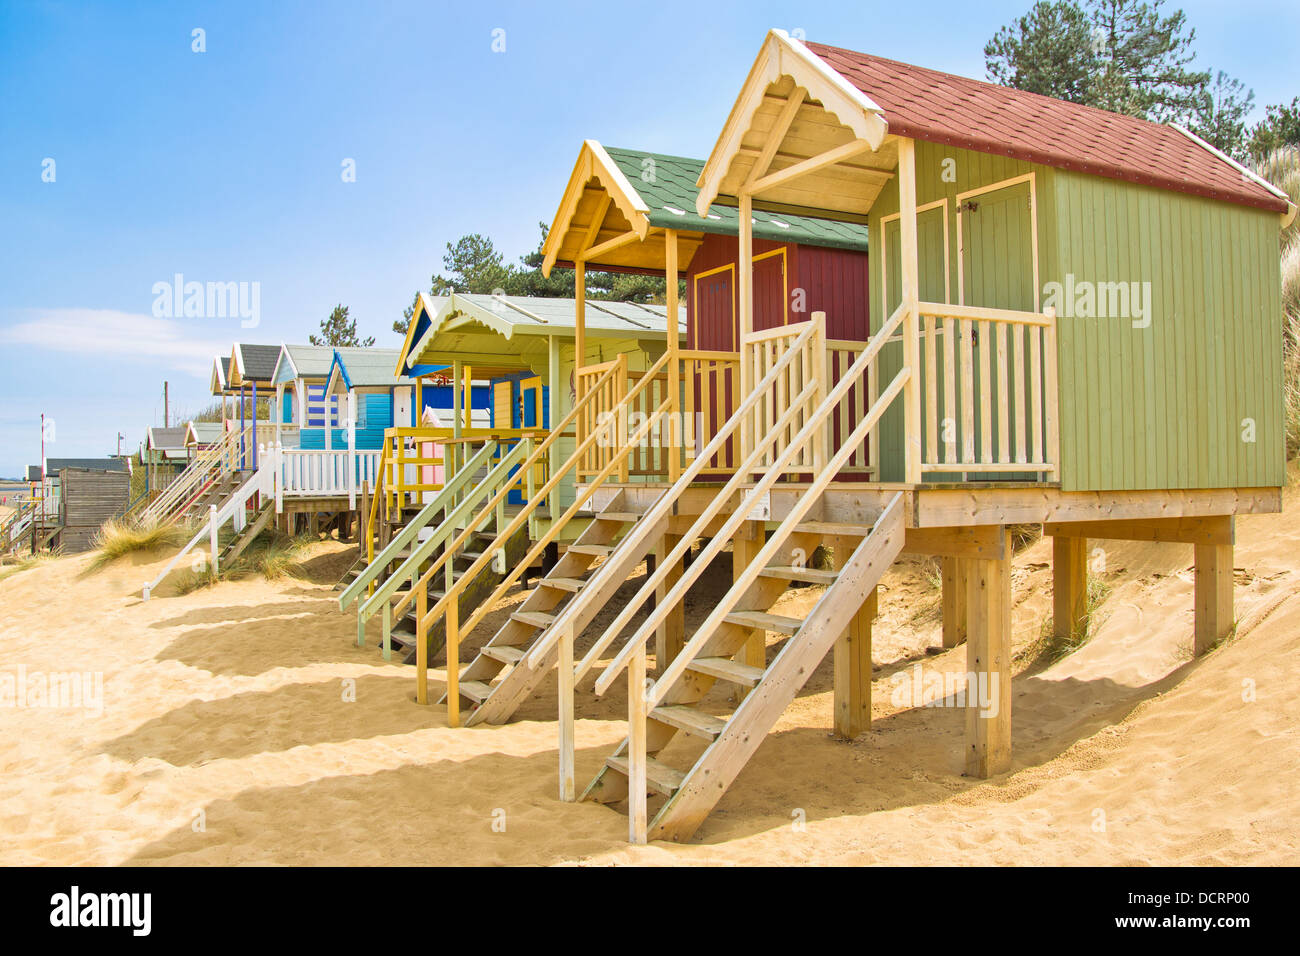 Row of colourful beach huts in golden sand on beach with blue sky Stock Photo